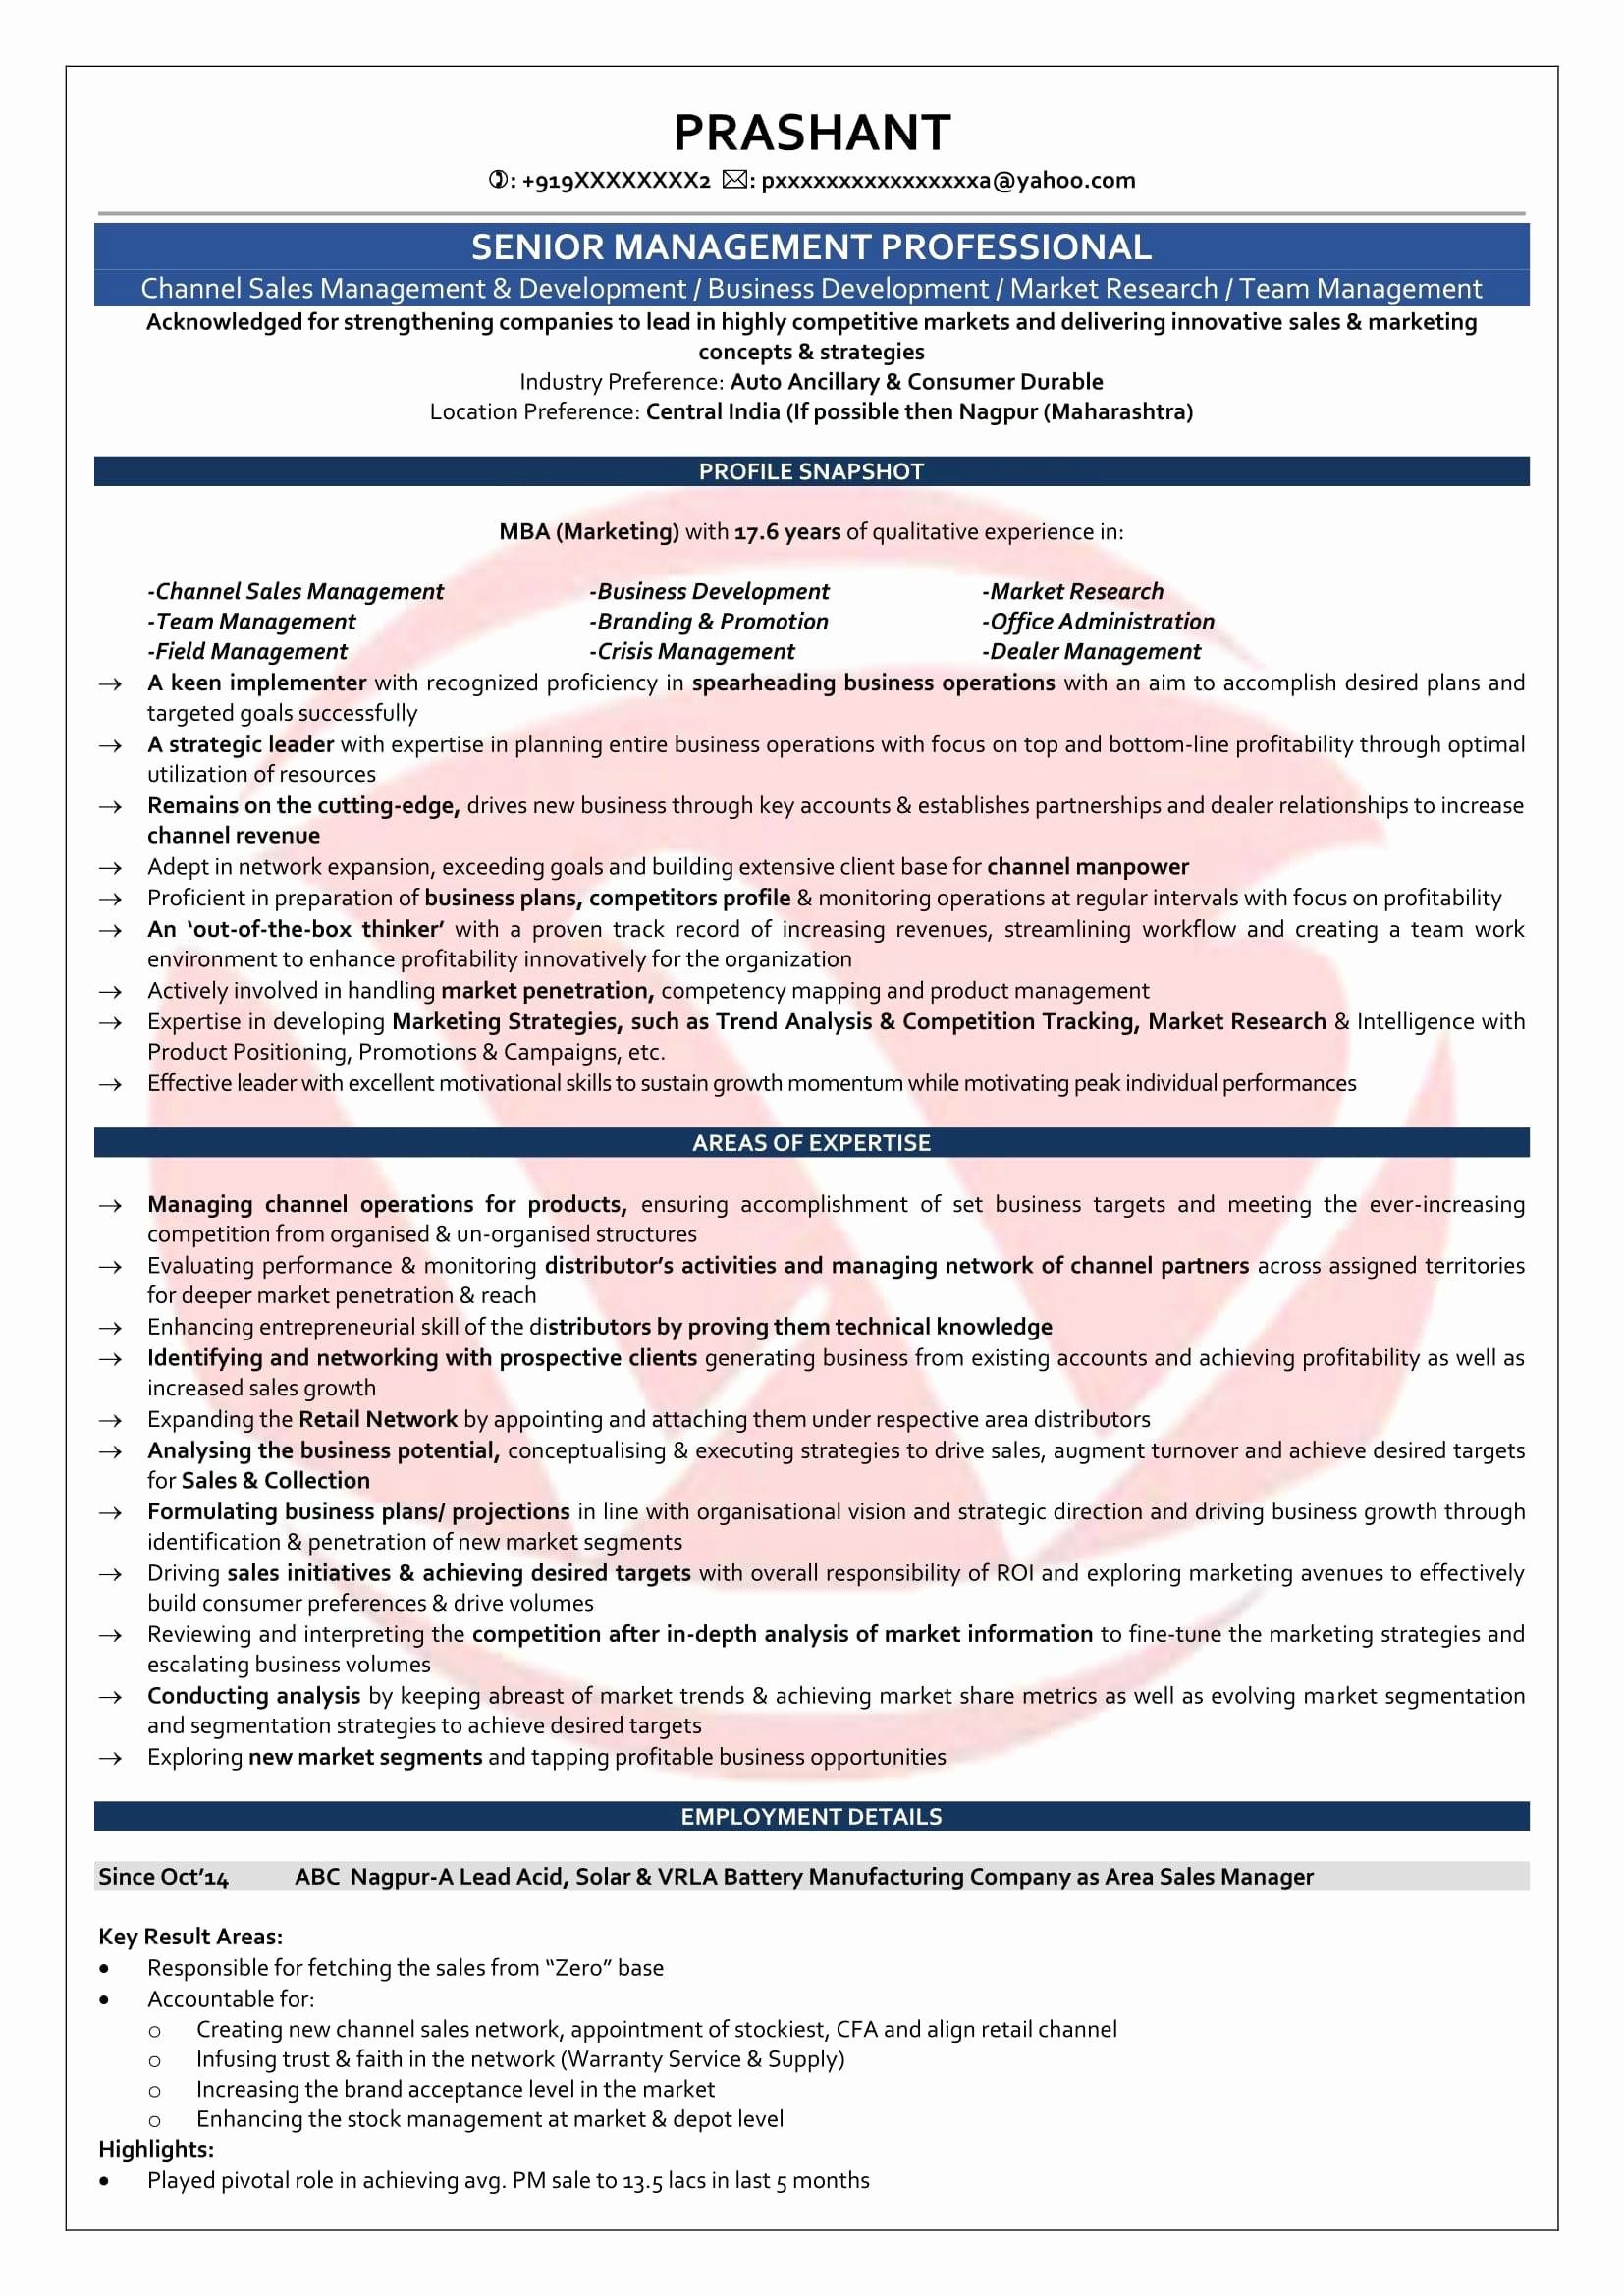 Resume Samples for Freshers Mba In Marketing 14 Awesome Resume format for Mba Marketing Fresher Resume format …